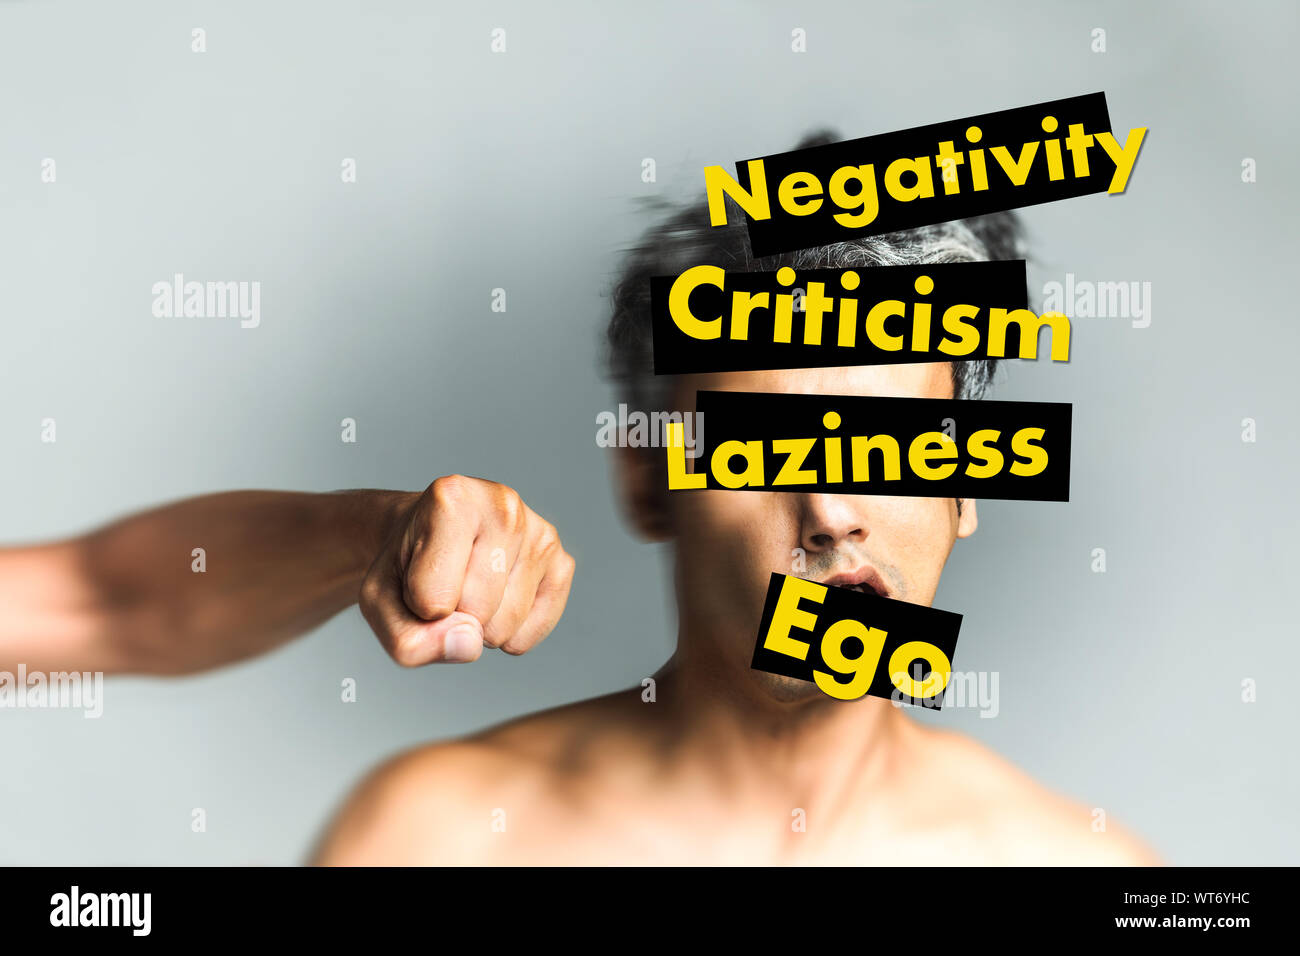 hand punching a face with yellow text on it saying negativity, criticism, laziness, ego - Life improvement concept - Personal Growth - Productive mind Stock Photo